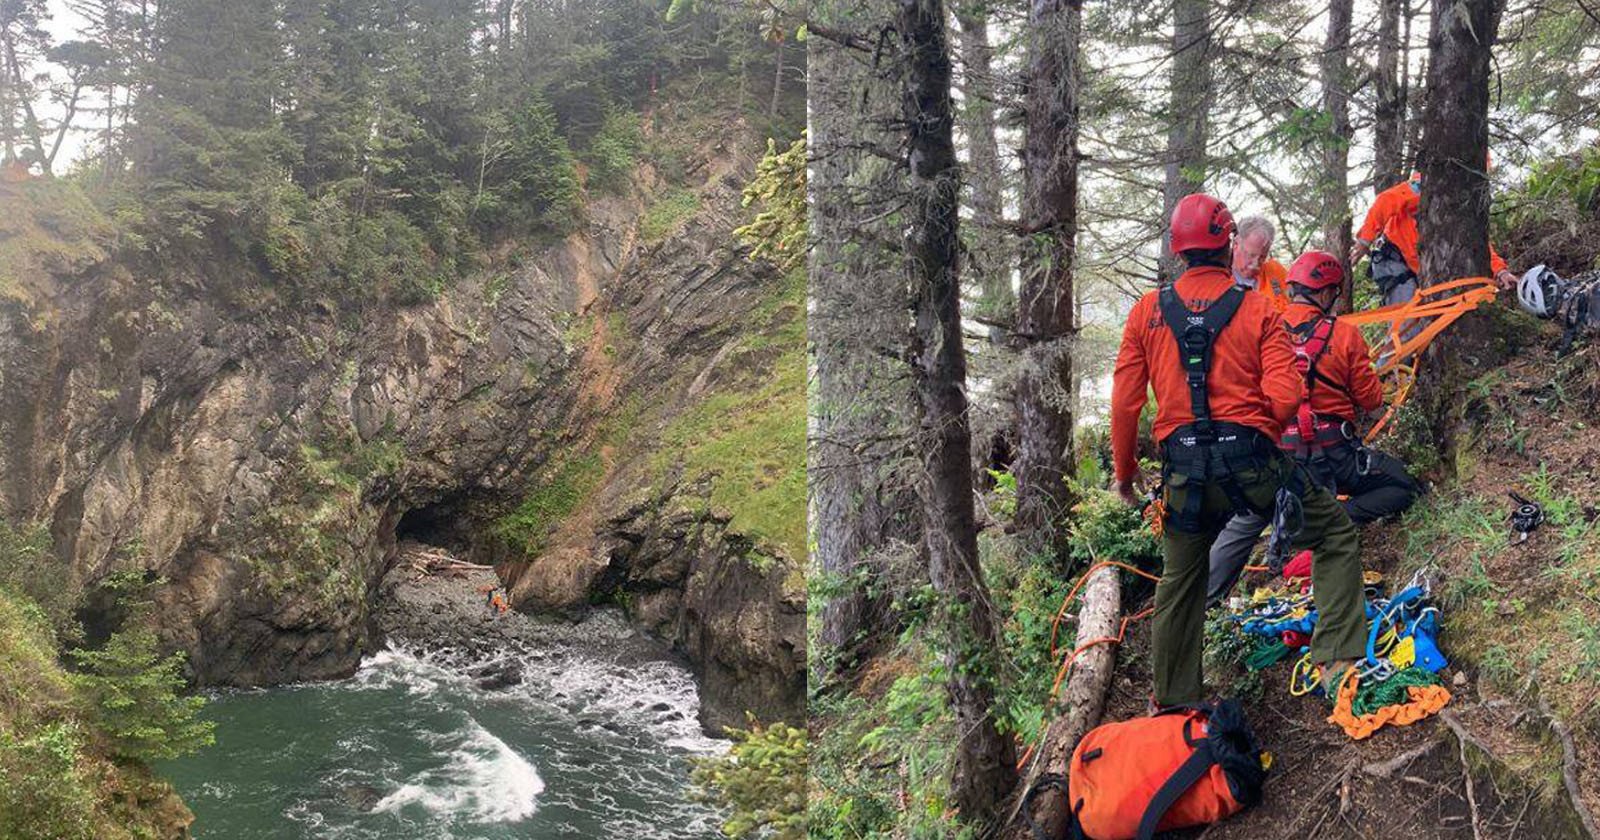  landscape photographer dies falling from 300-foot cliff oregon 